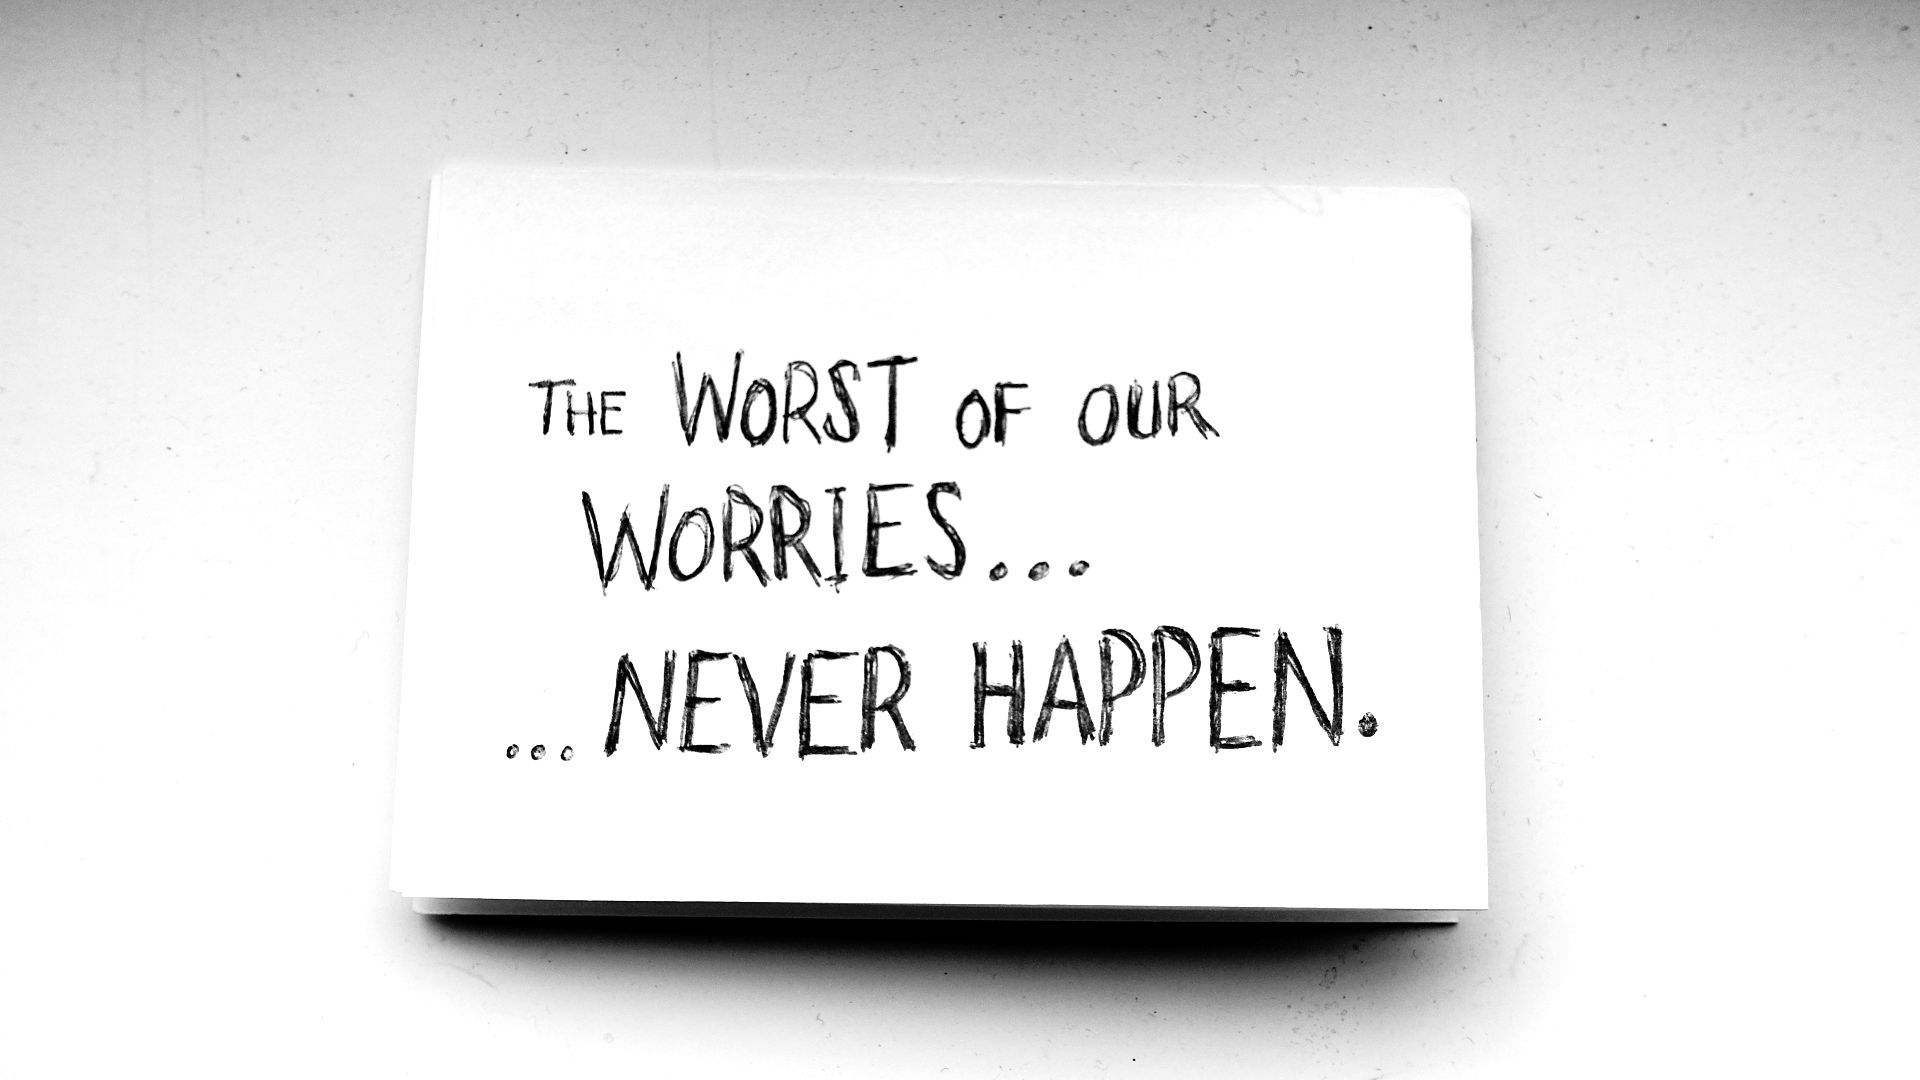 The worst of our worries… never happen